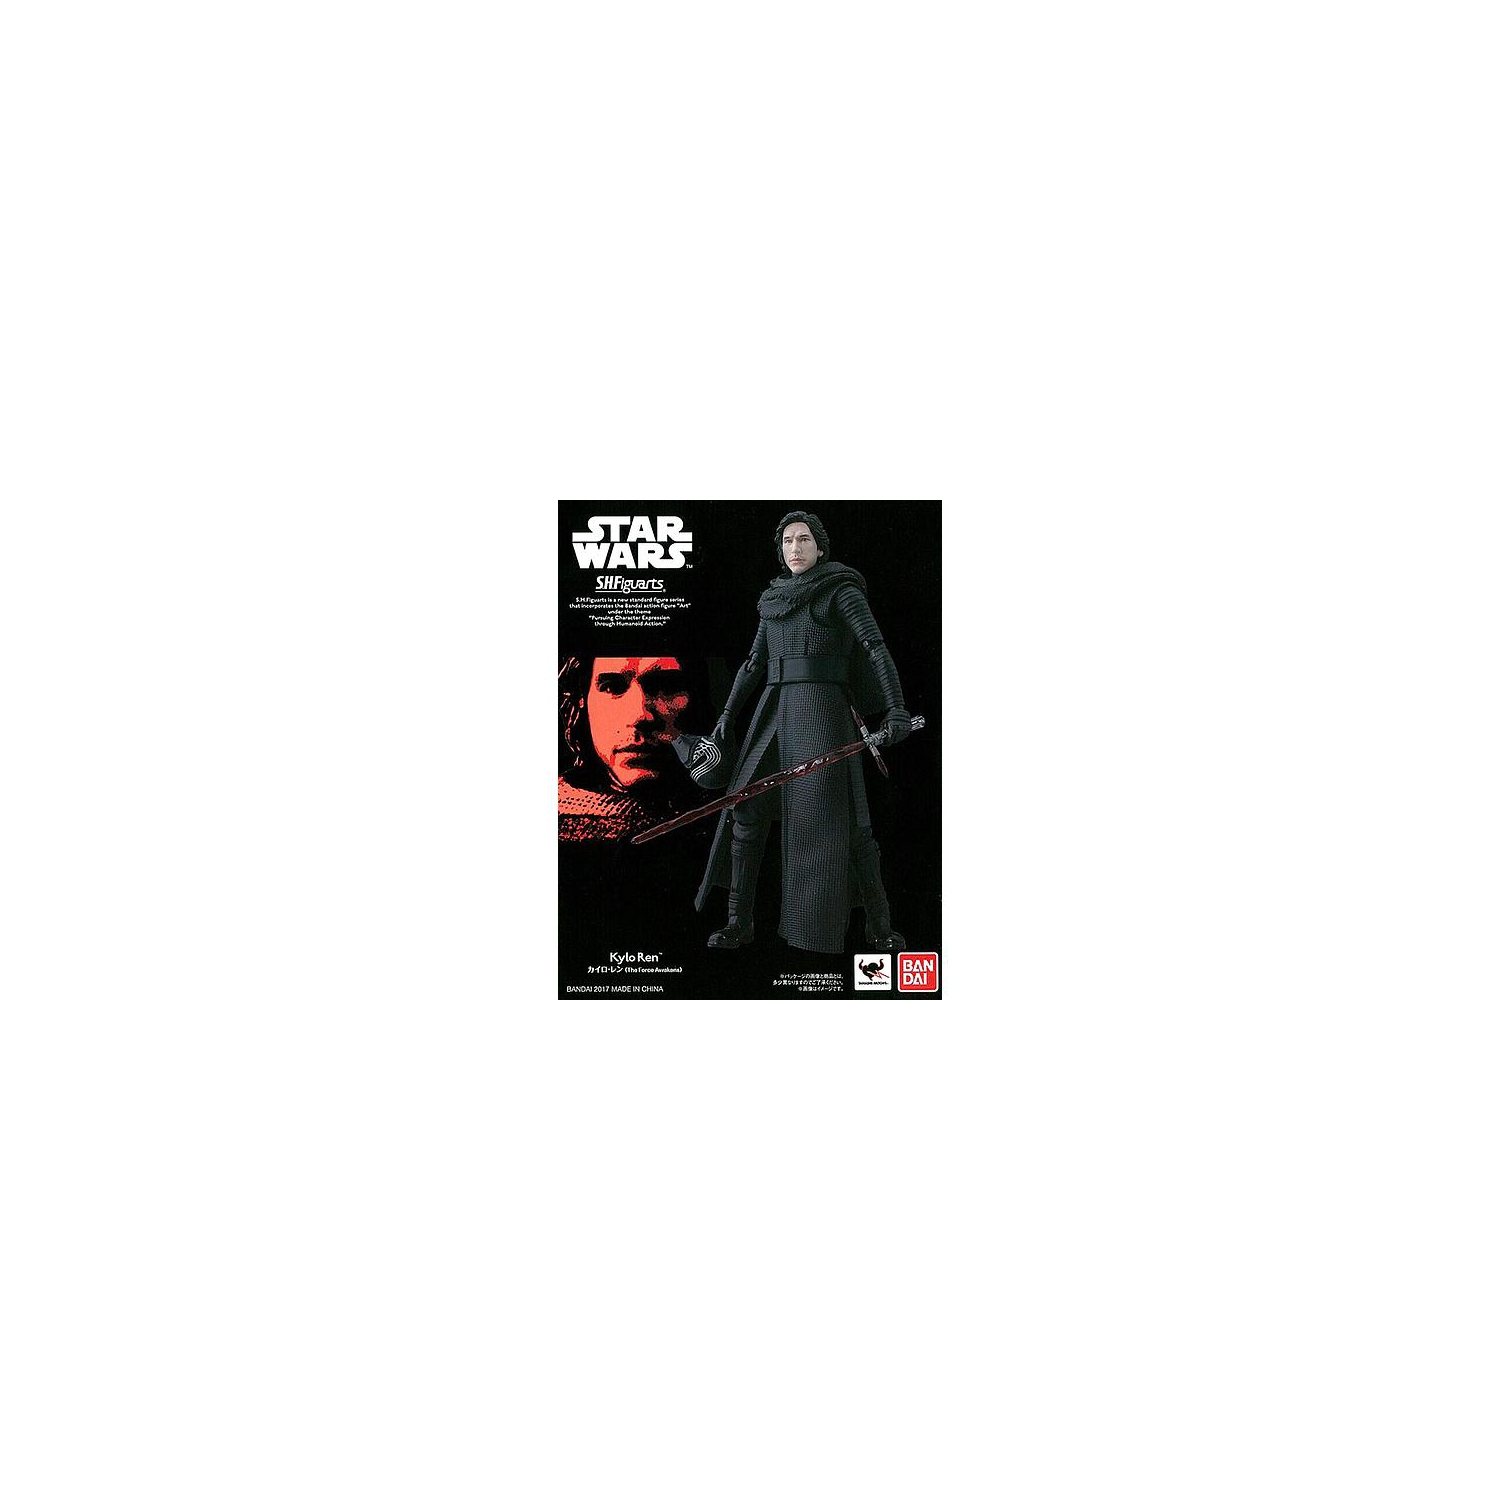 Bandai BANDAI S.H. Figuarts Star Wars The Force Awakens 6" Action Figure Kylo Ren Limited Edition